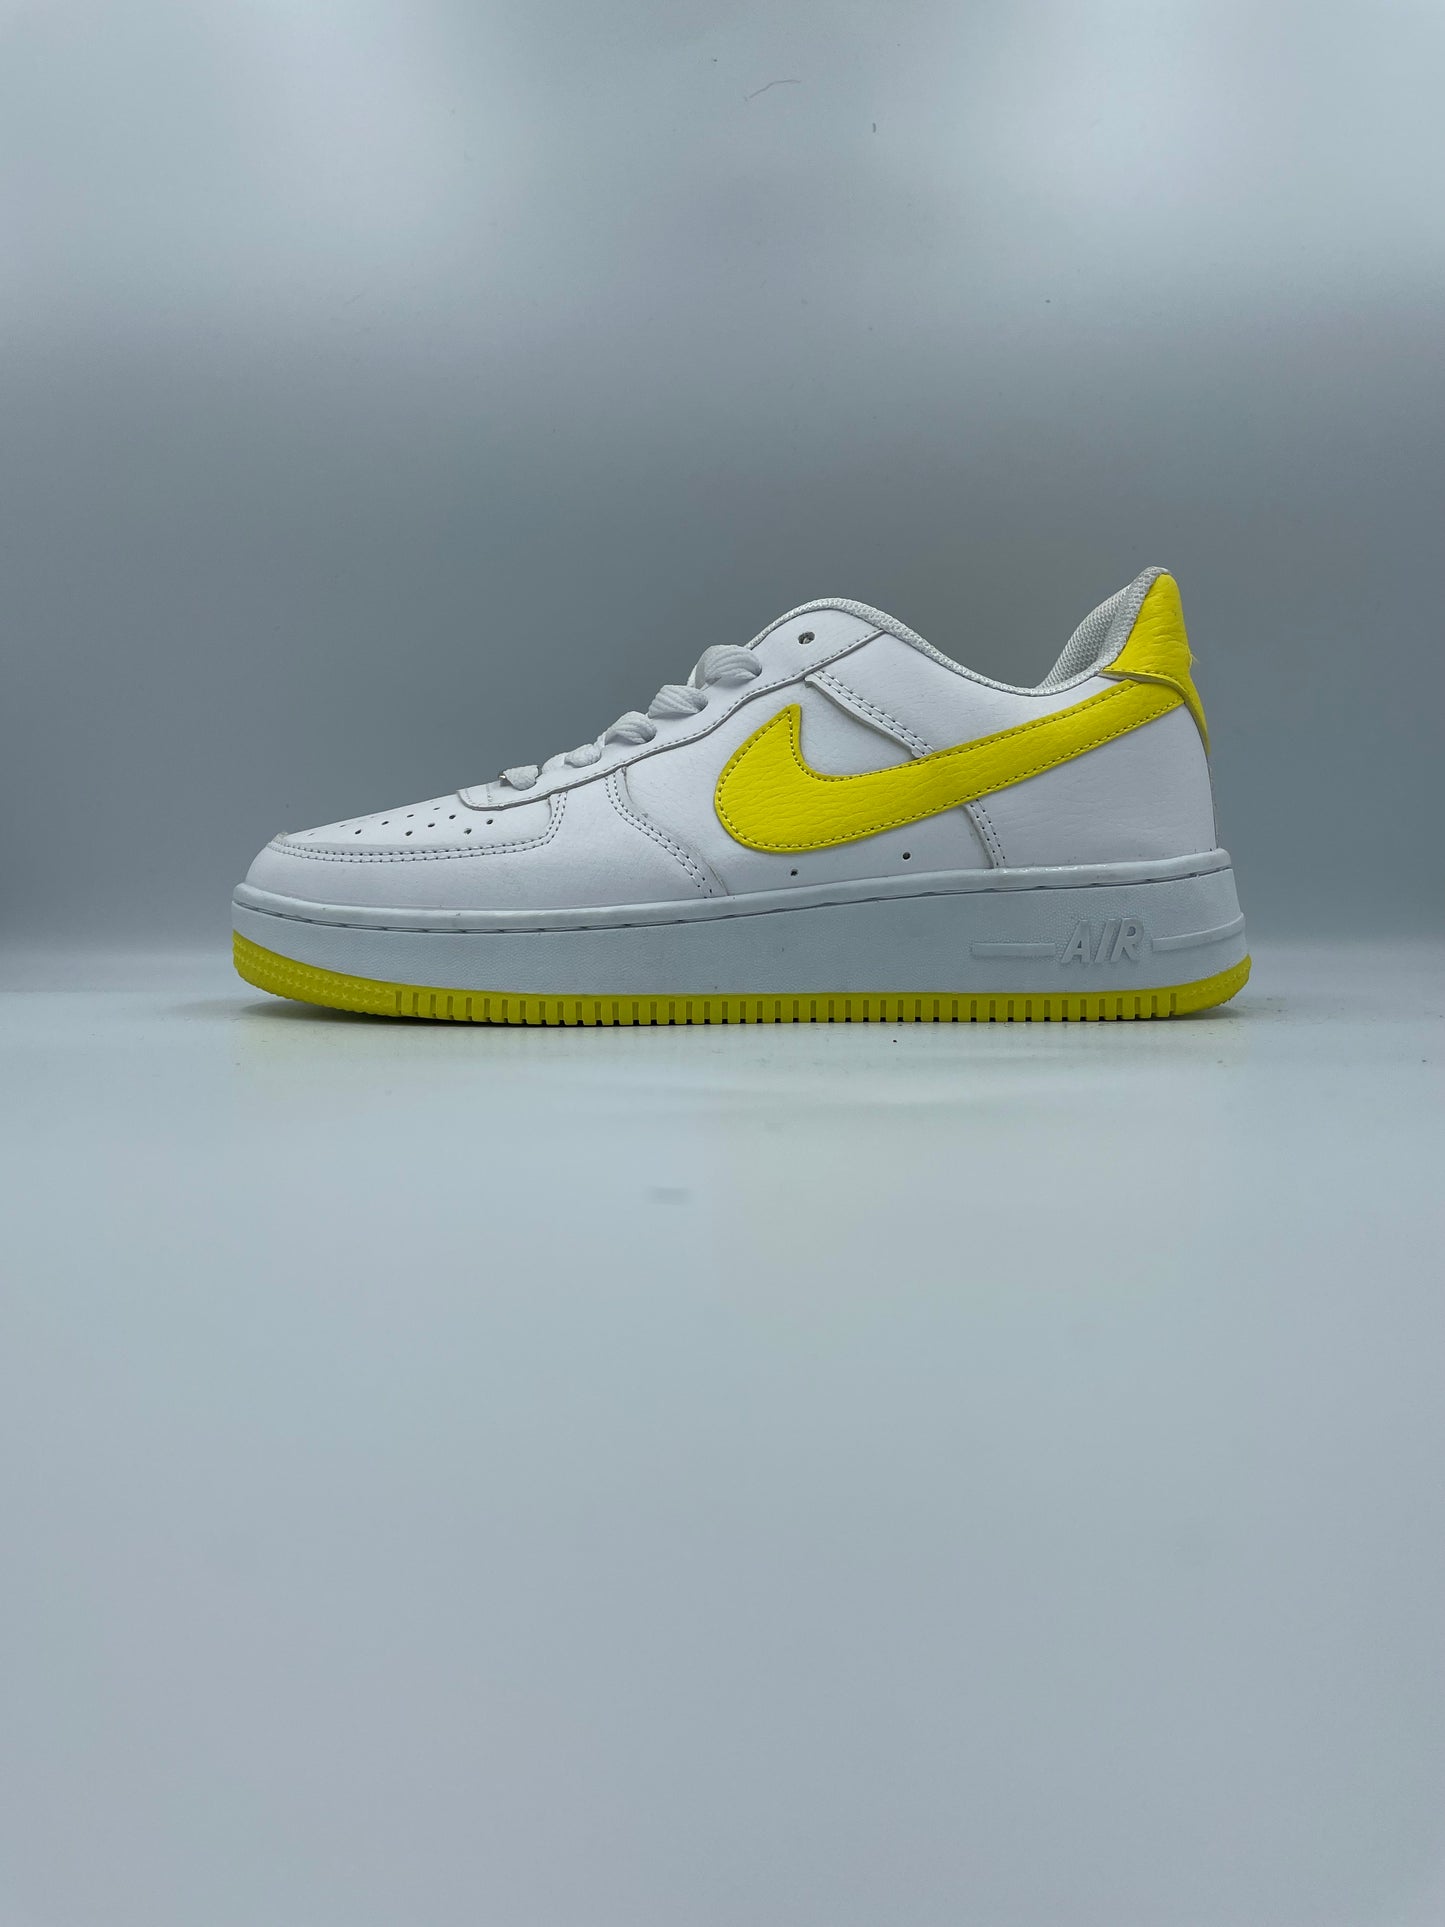 NIKE AIR FORCE 1 LOW 'WHITE BRIGHT CITRON'